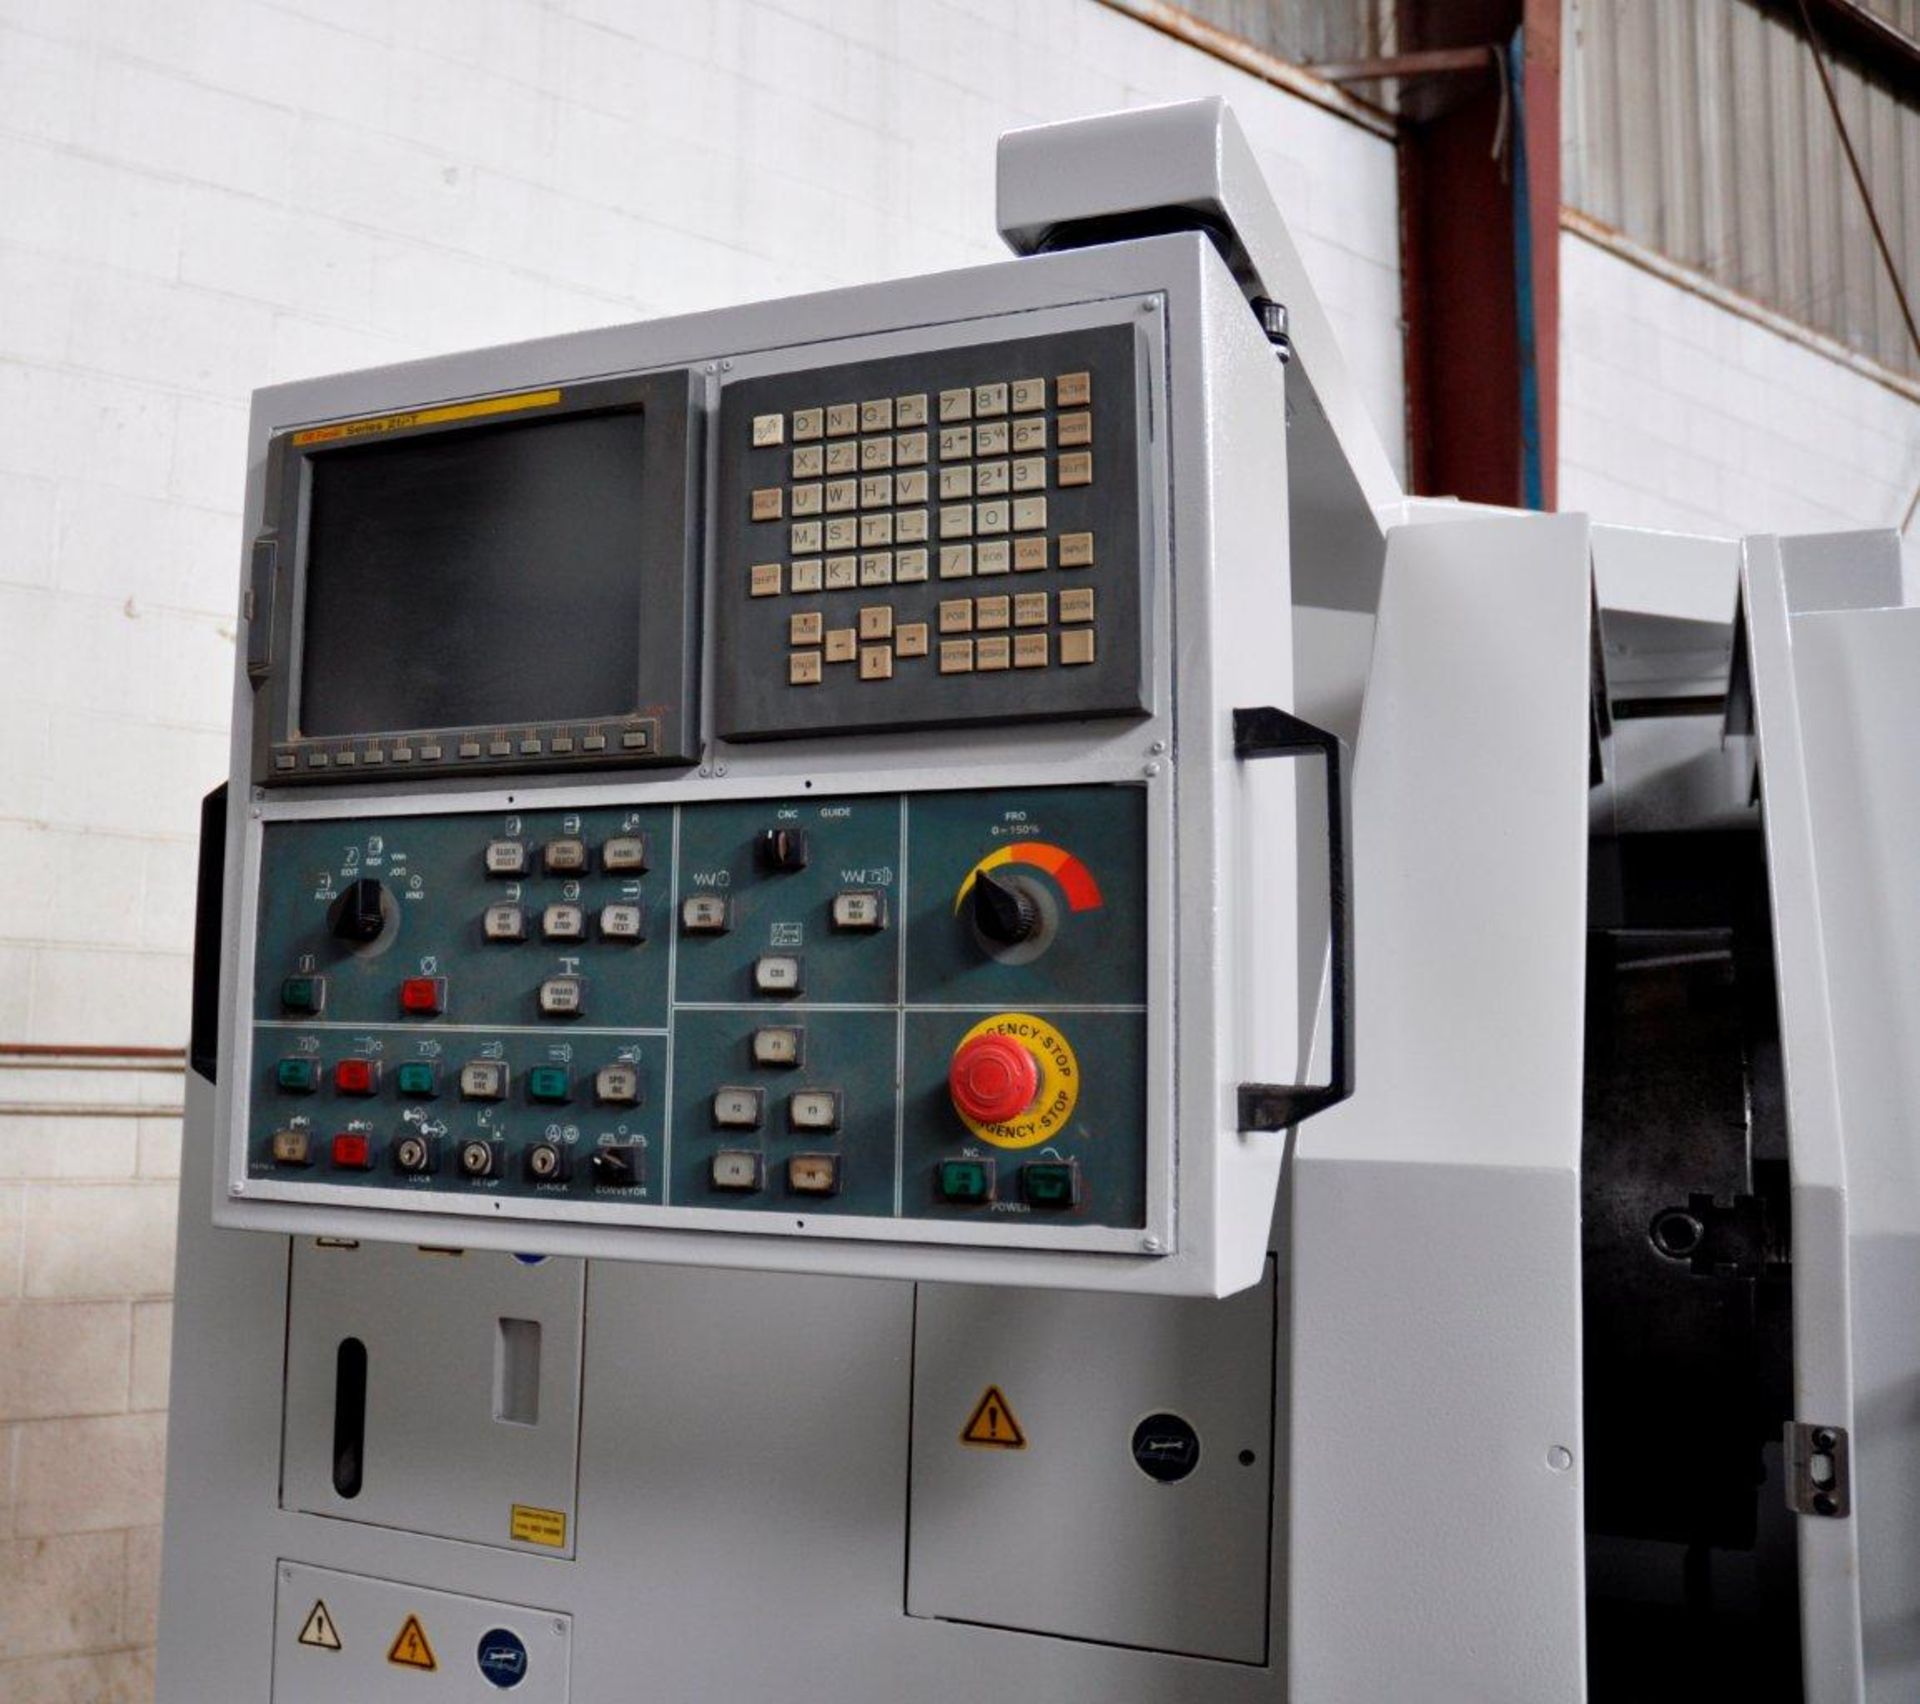 CNC LATHE, ROMI MDL. M-27 27" X 80" COMBINATION, new 2007, equipped w/GE Fanuc 21i-T CNC control, - Image 9 of 12